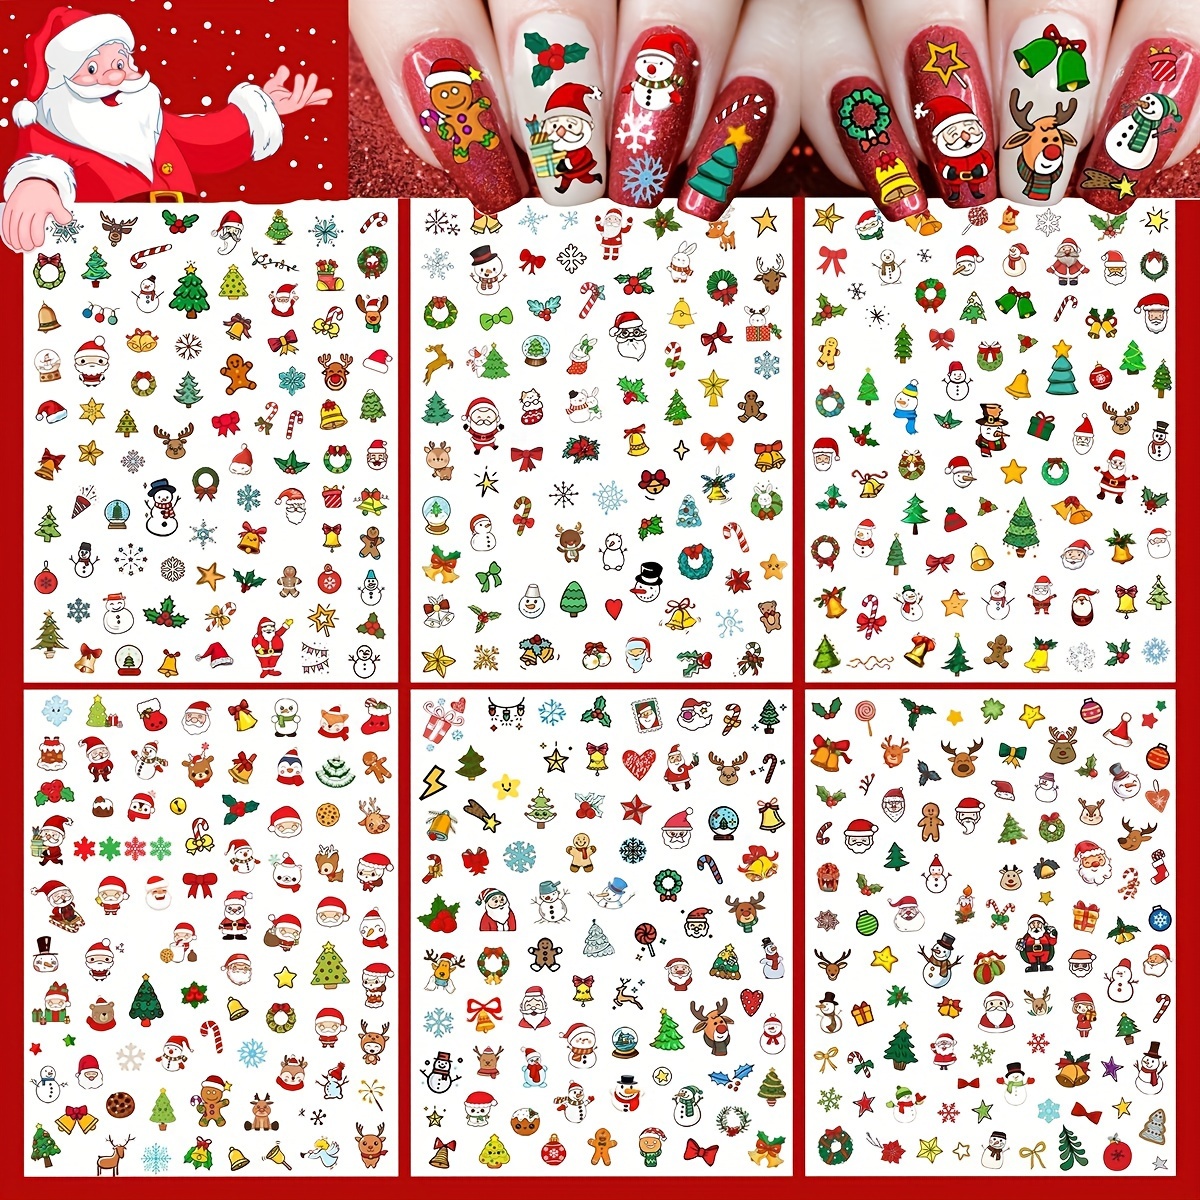 

6 Sheets Christmas Nail Art Stickers Decals For Women Manicure, Funny Santa Claus Elk Deer Self-adhesive Nail Decals Stickers, Xmas Snowman Nail Decoration Christmas Accessories Party Supplies